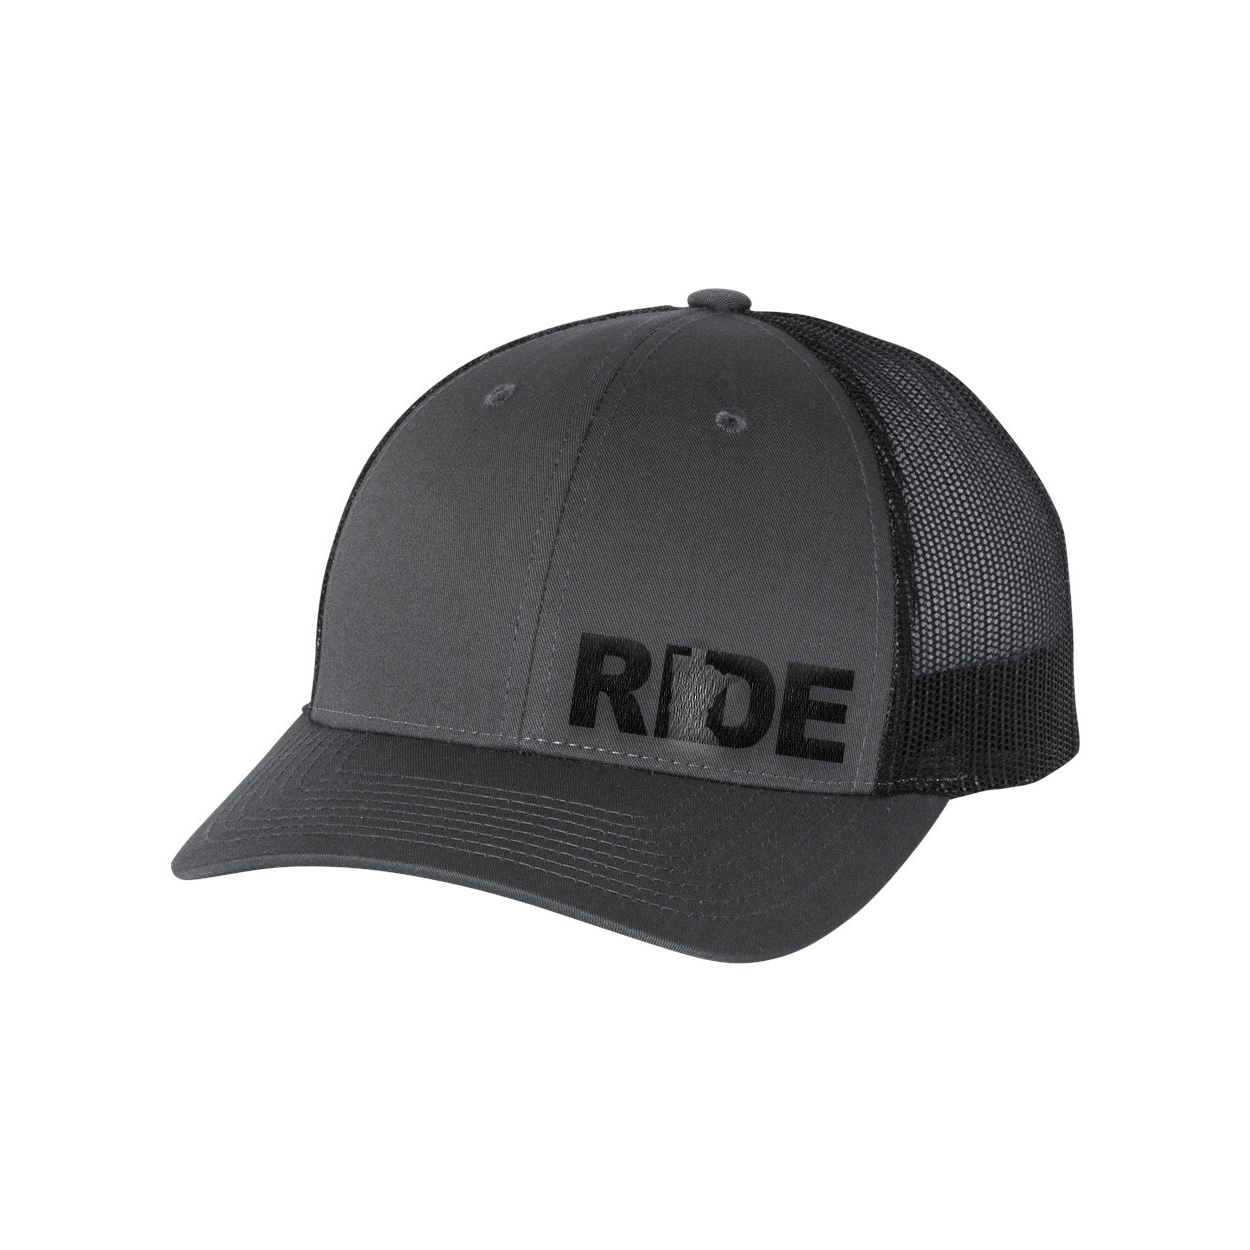 Ride Minnesota Night Out Pro Embroidered Snapback Trucker Hat Gray/Black